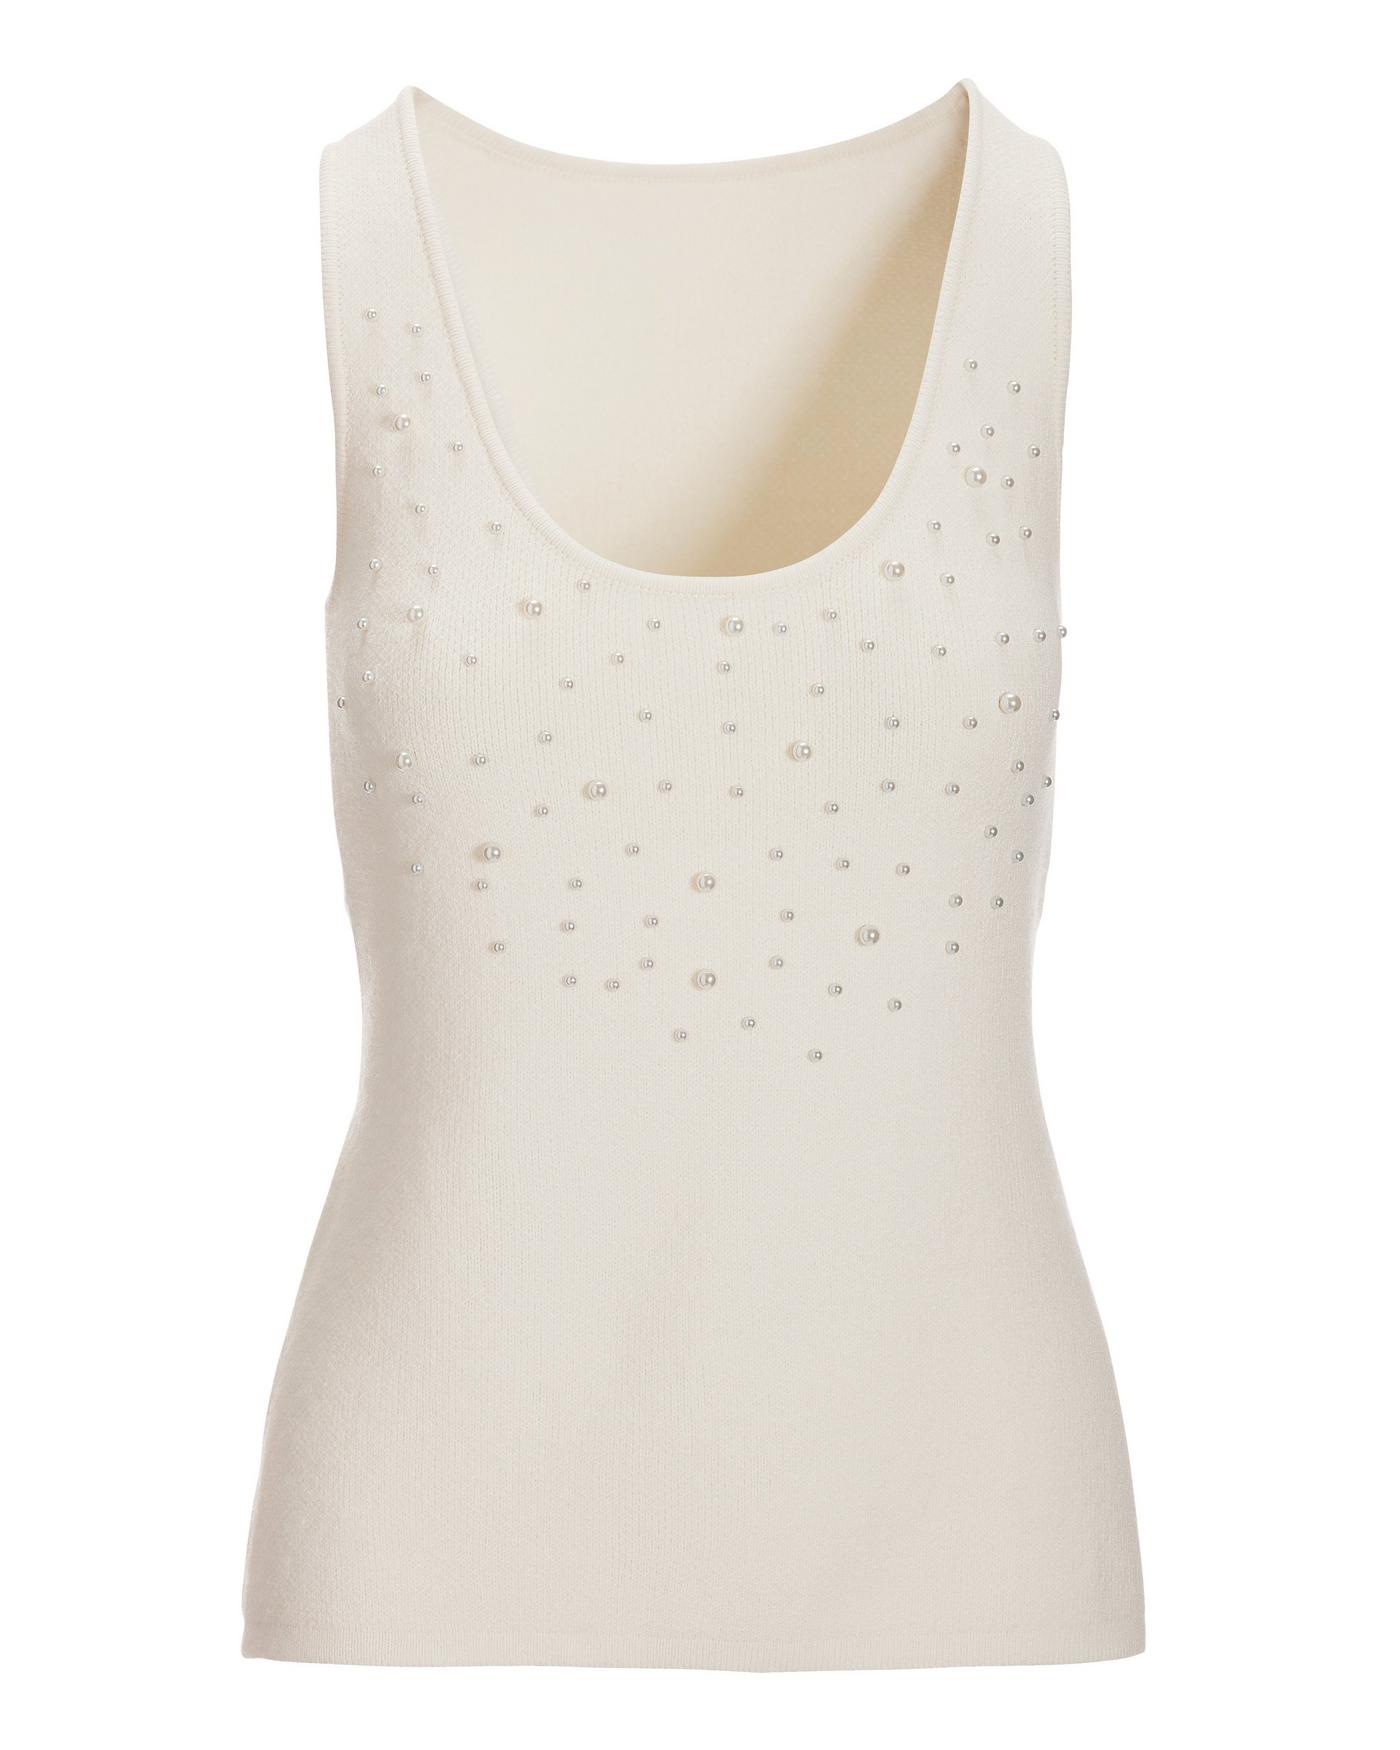 Pearl Embellished Scoop Neck Sweater Tank Top - Off White